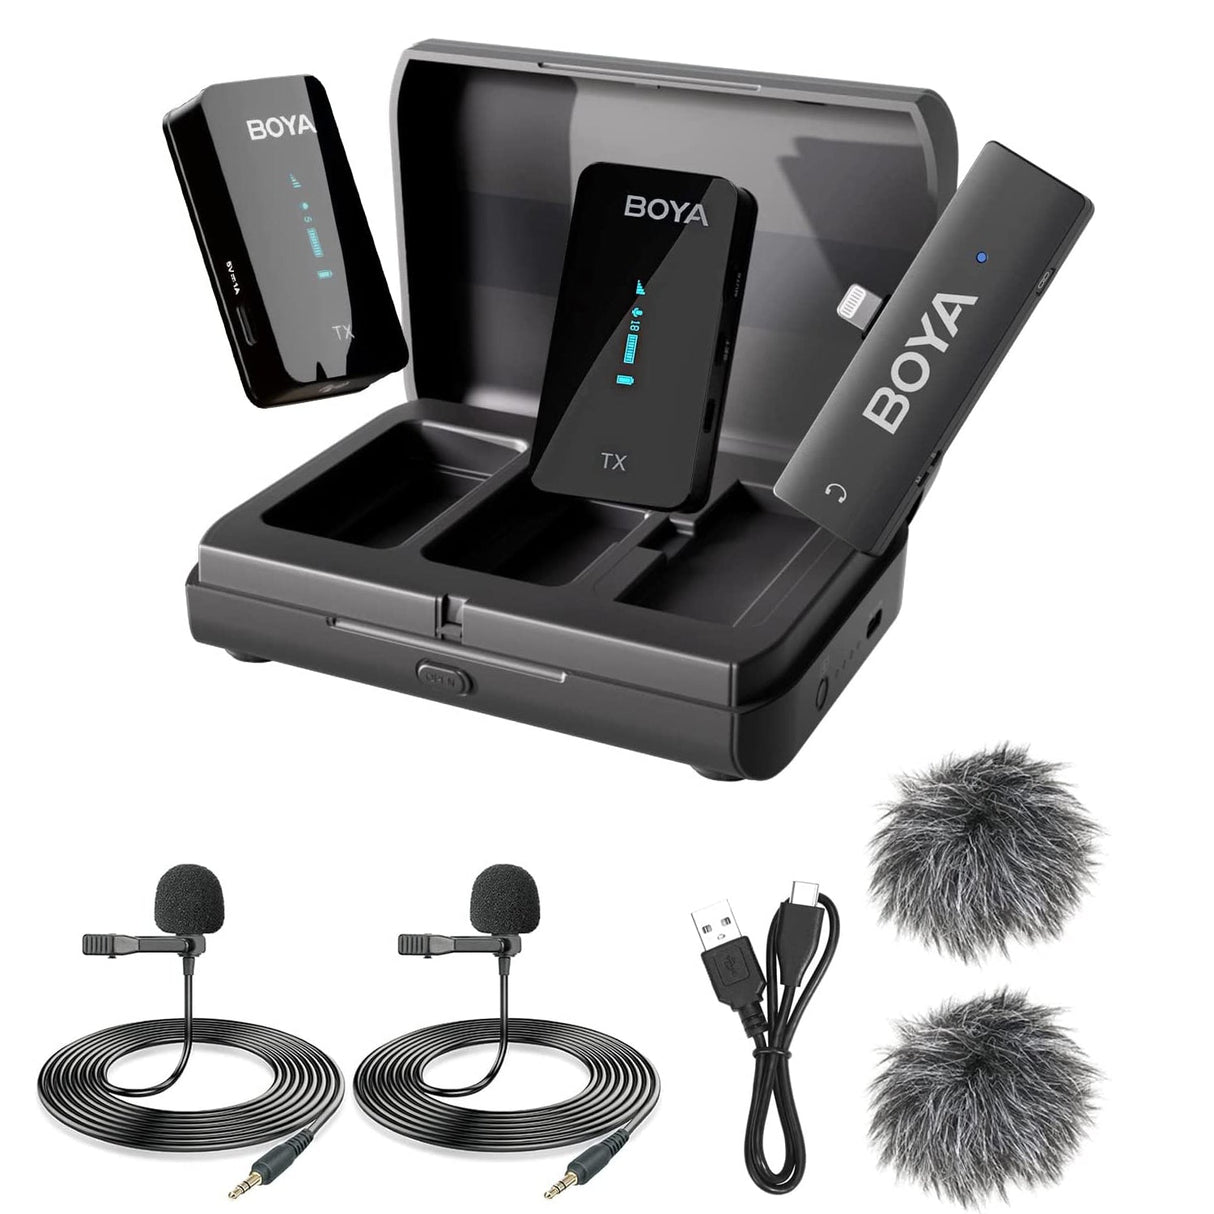 BOYA BY-XM6-K4 DUAL CHANNEL WIRELESS MICROPHONE FOR I-PHONE DEVICES